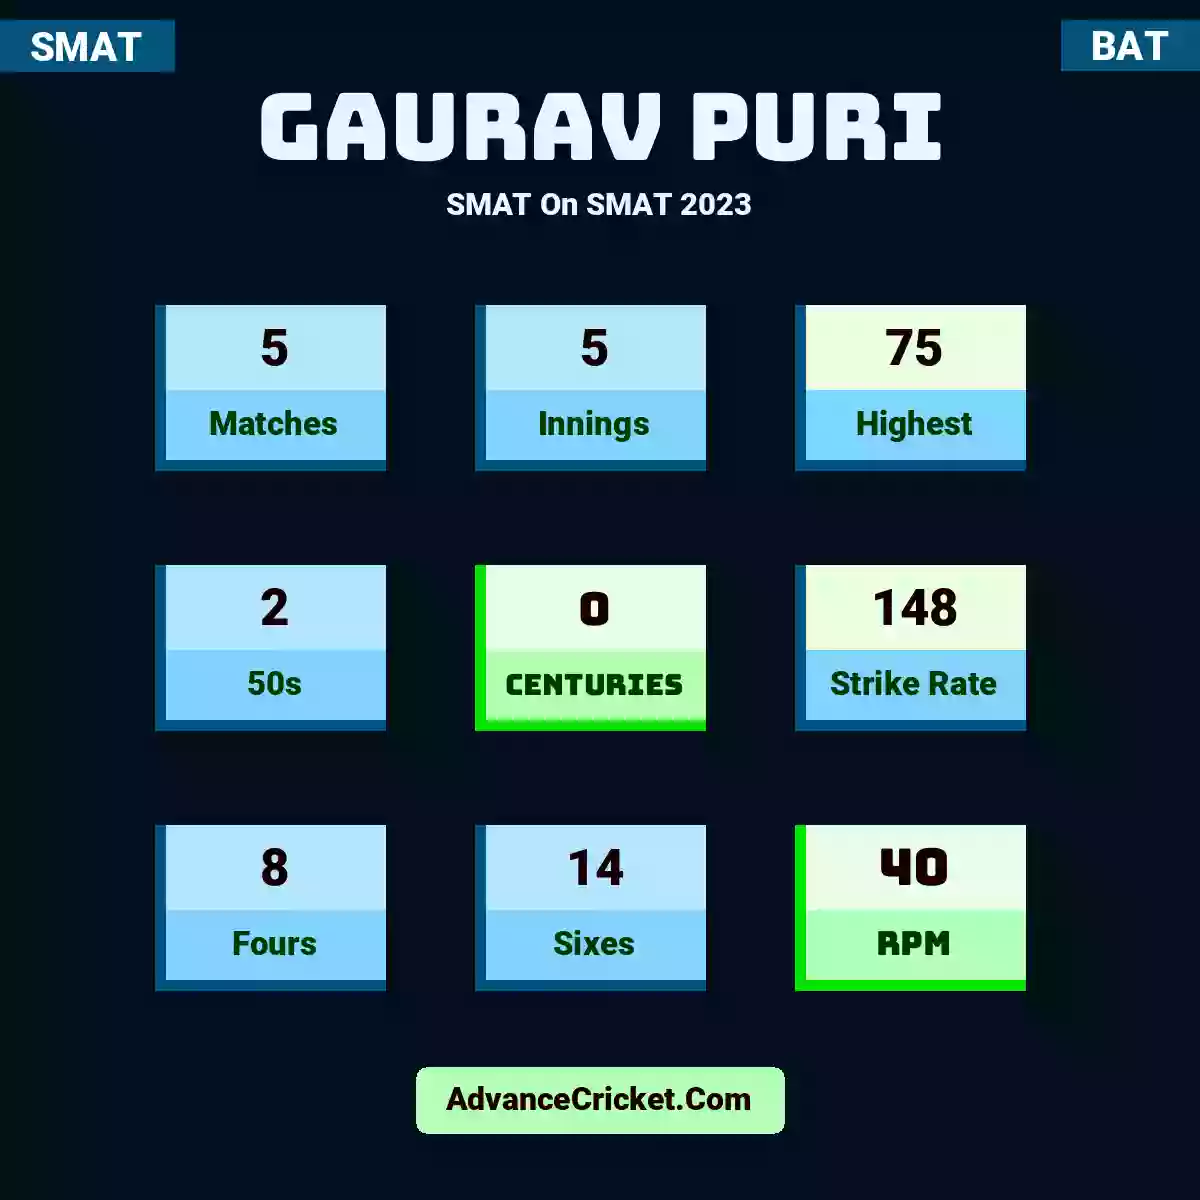 Gaurav Puri SMAT  On SMAT 2023, Gaurav Puri played 5 matches, scored 75 runs as highest, 2 half-centuries, and 0 centuries, with a strike rate of 148. G.Puri hit 8 fours and 14 sixes, with an RPM of 40.